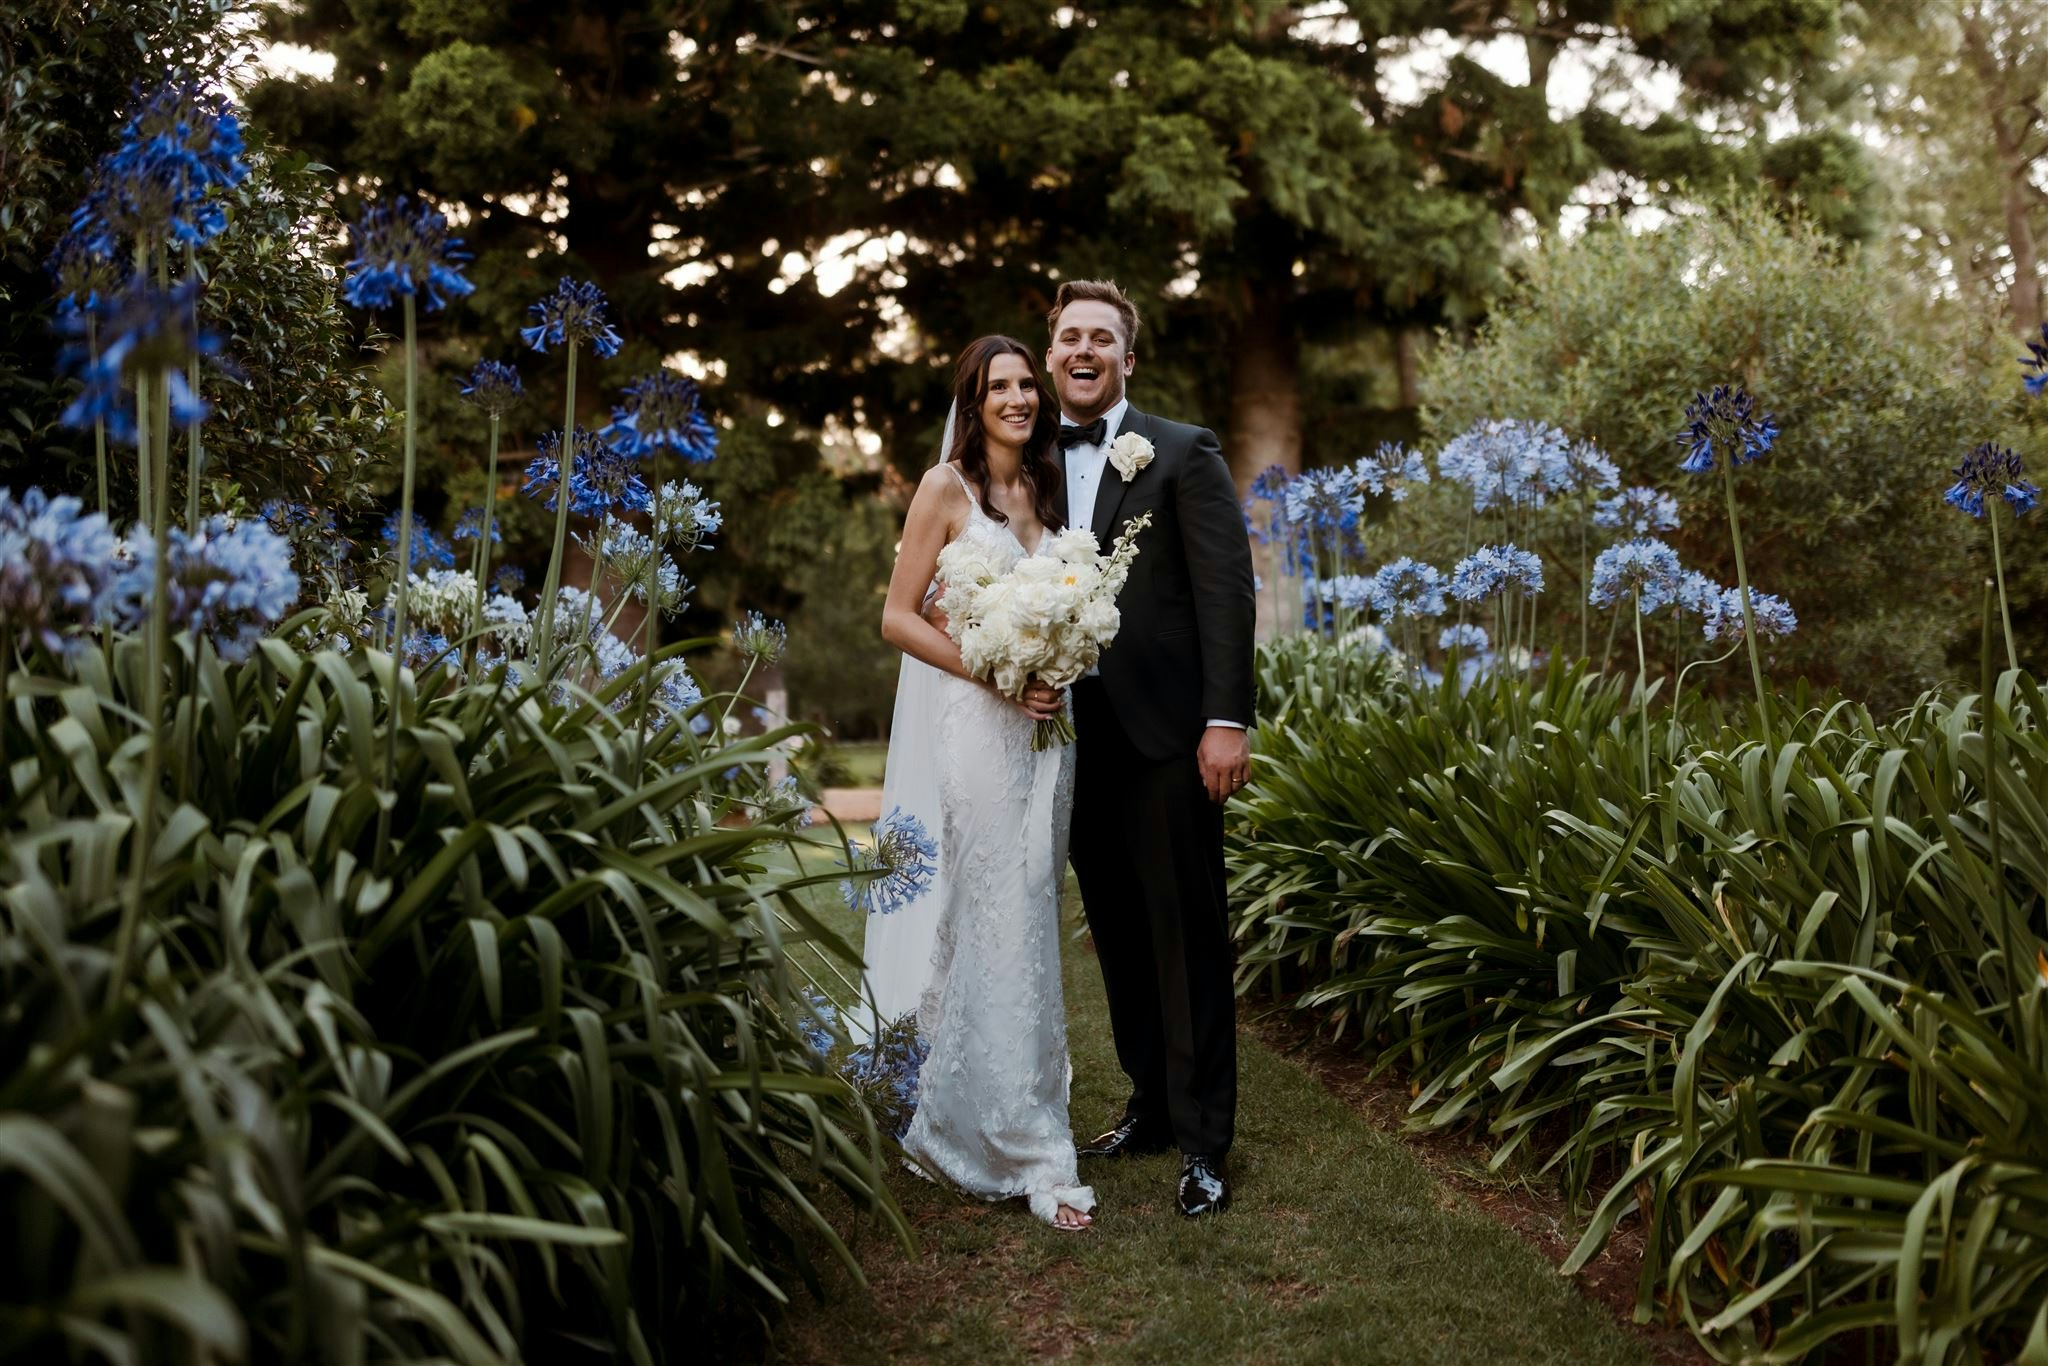 Bride and groom standing in gardens with agapanthus around